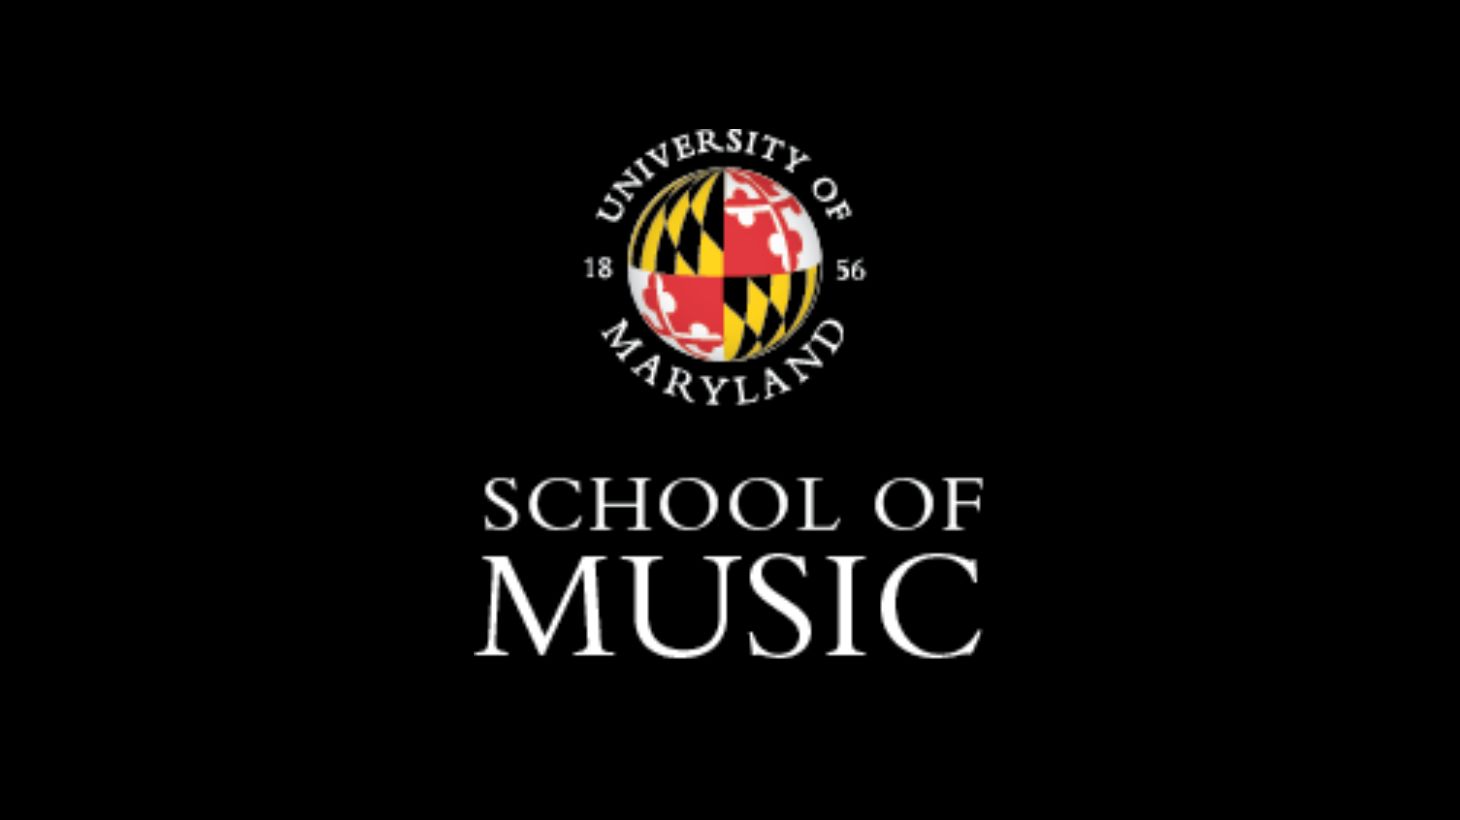 UMD School of Music logo in white text against a black background.